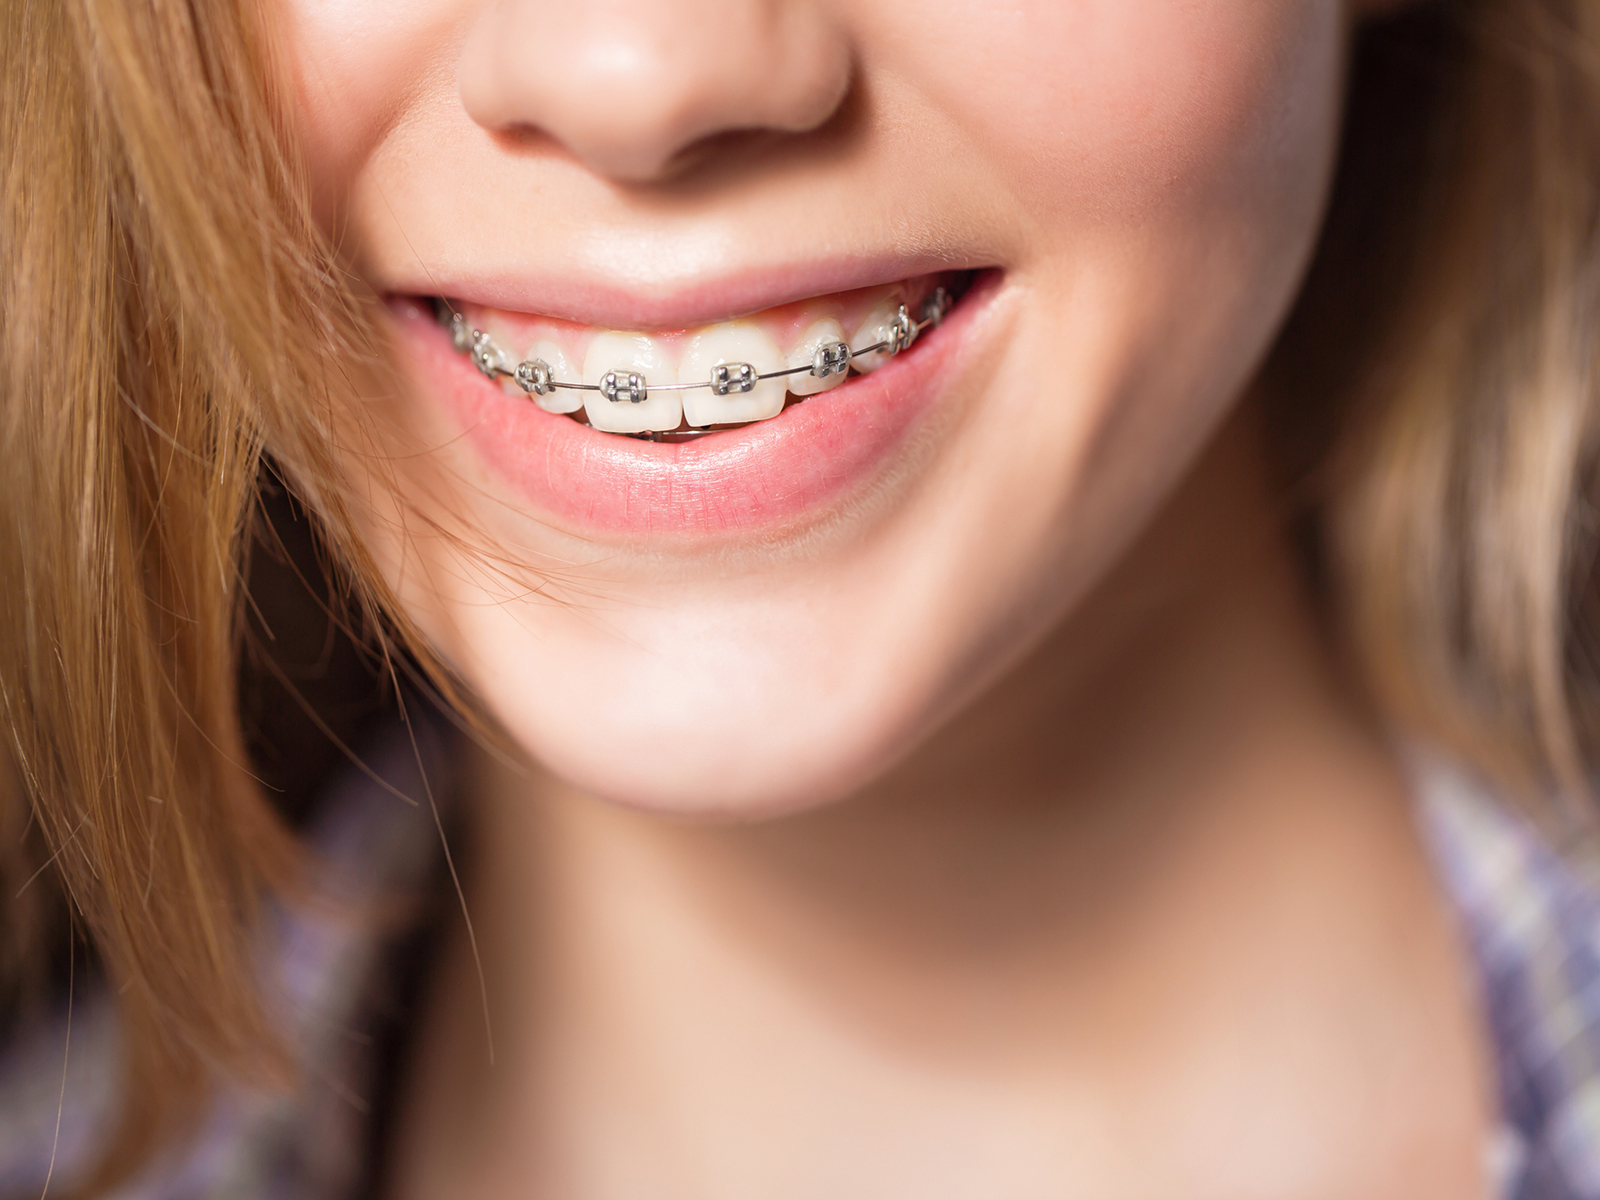 What is the best type of braces?